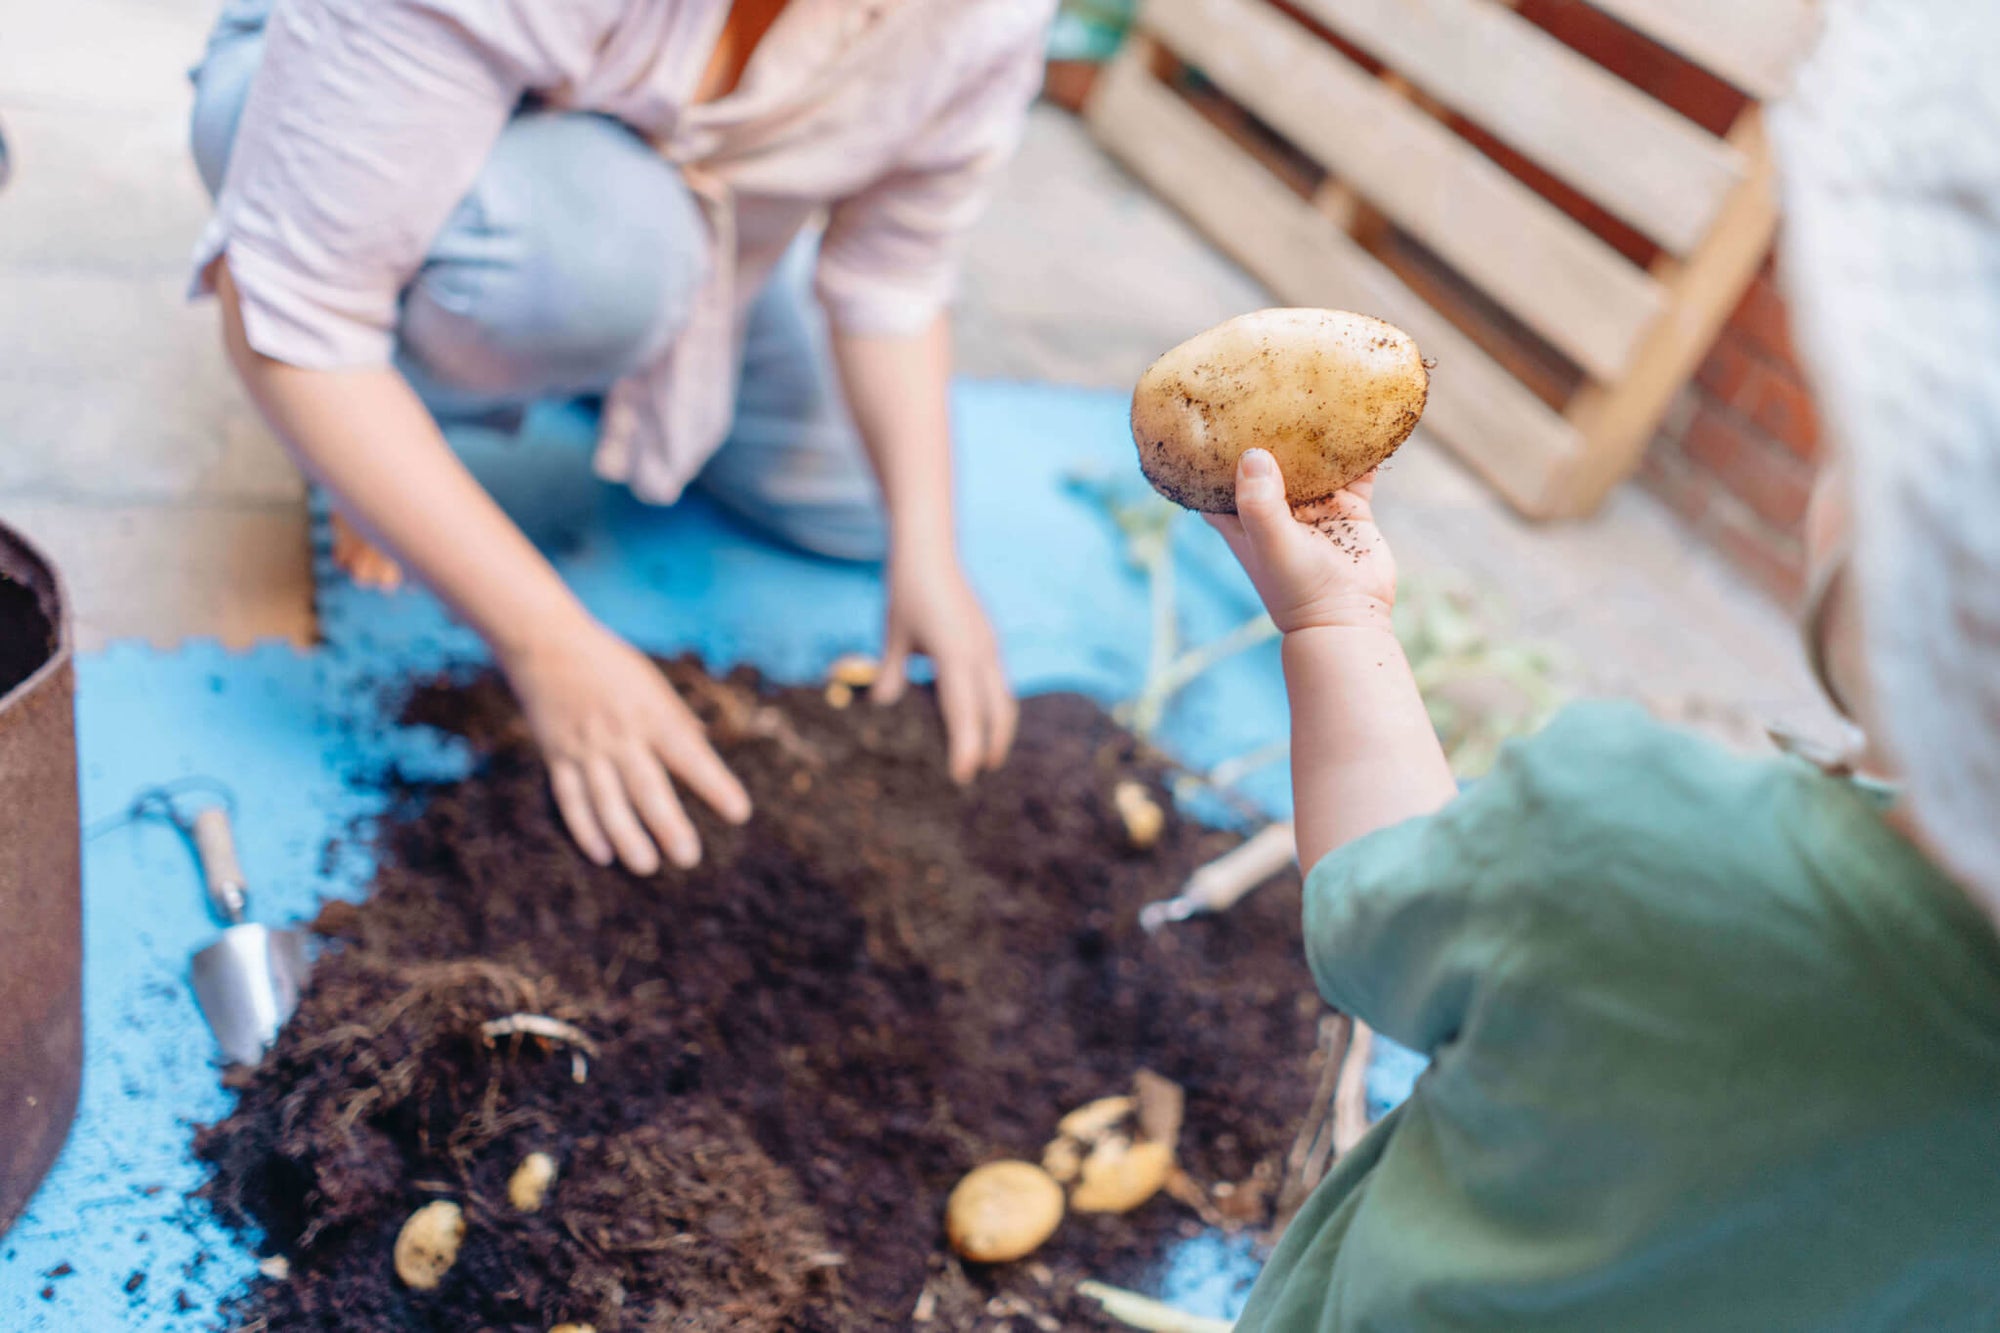 Small Spaces, Big Discoveries: Urban Gardening with Toddlers